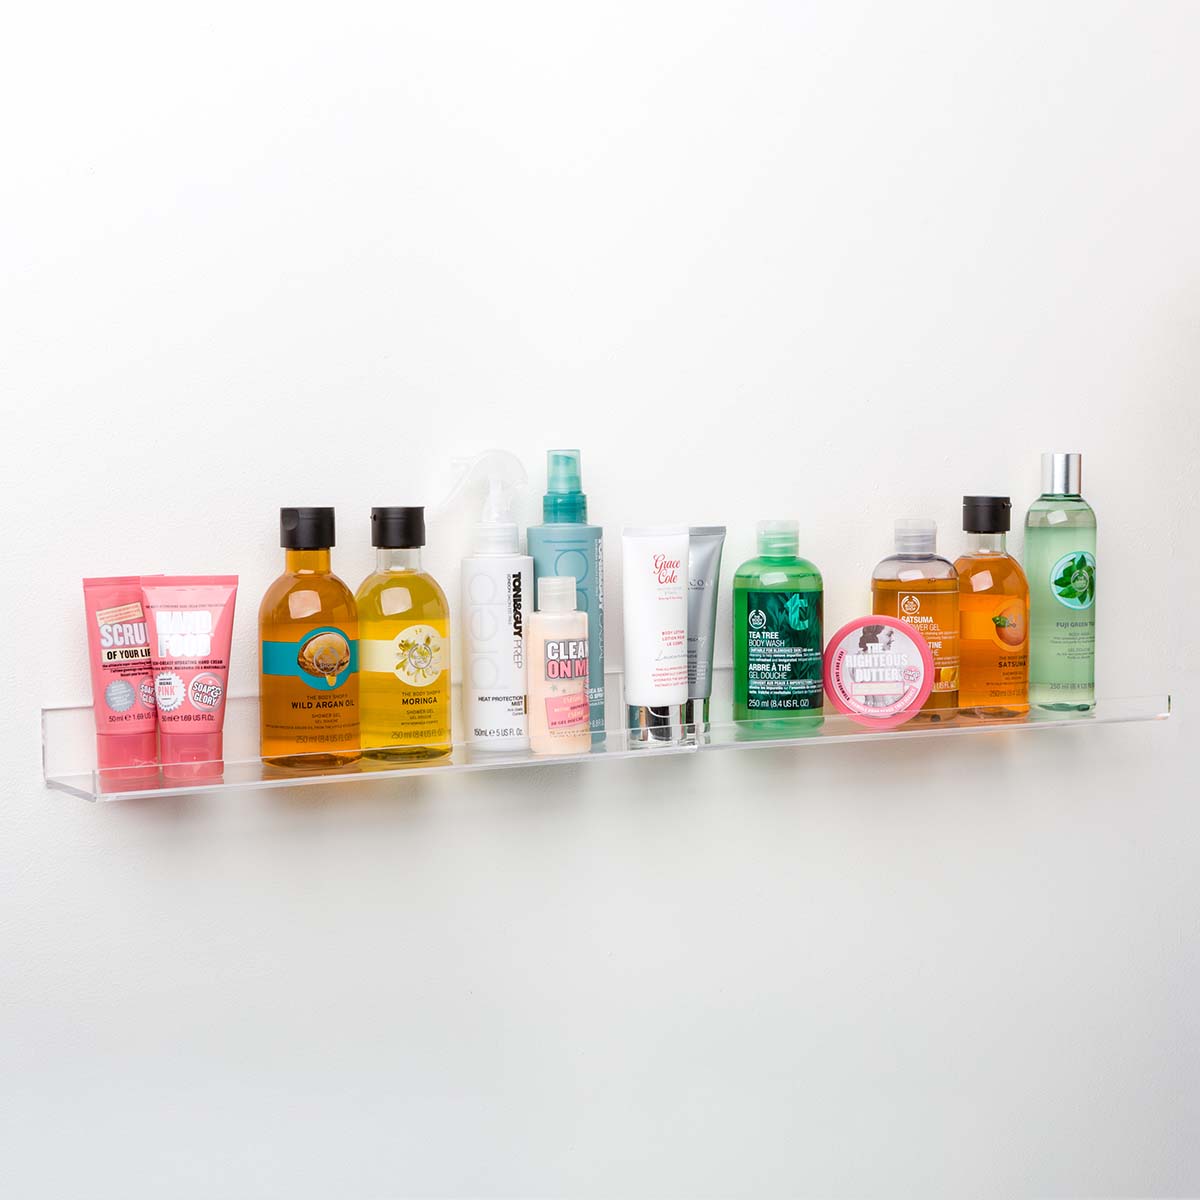 Weiai Clear Acrylic Shelf Review — Great for Small Bathrooms